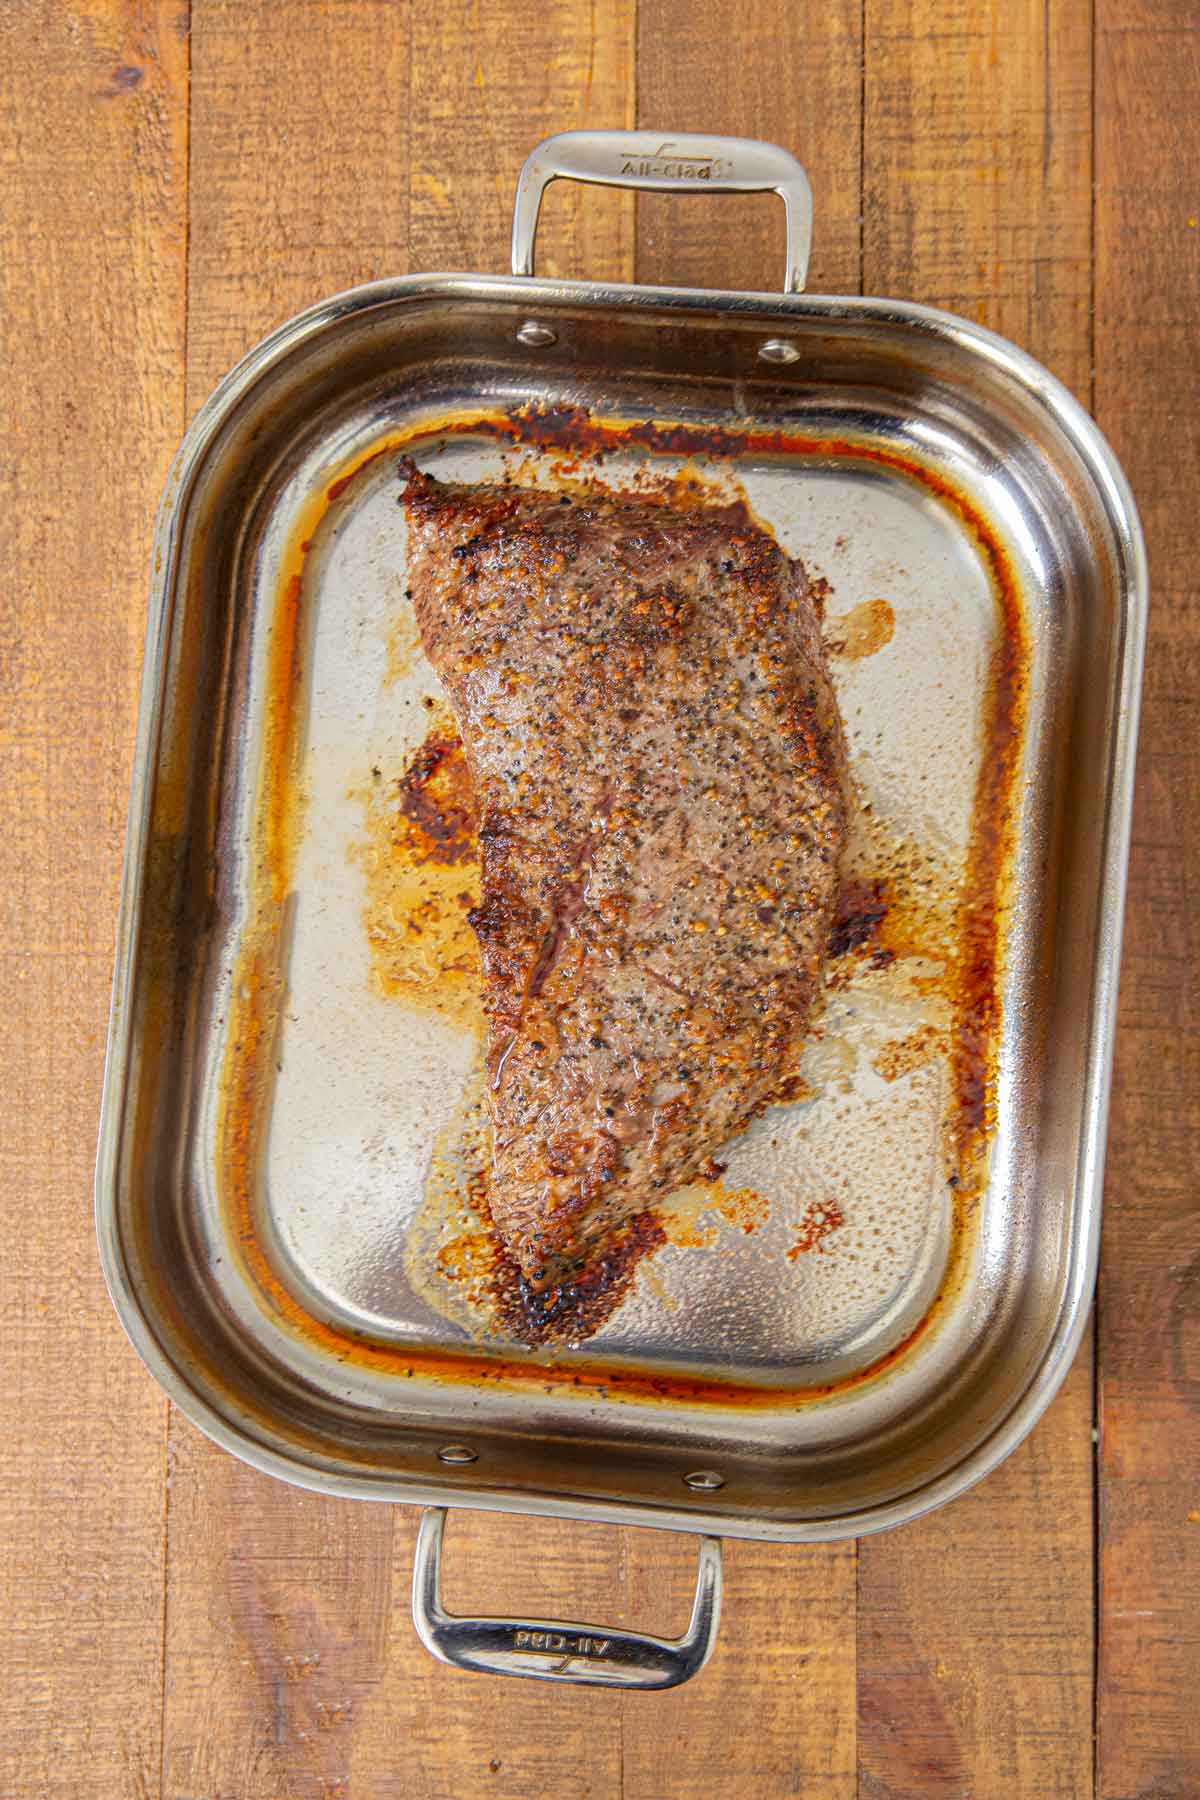 Easy Tri Tip Oven Or Bbq Recipe Dinner Then Dessert,How Many Quarters Are There